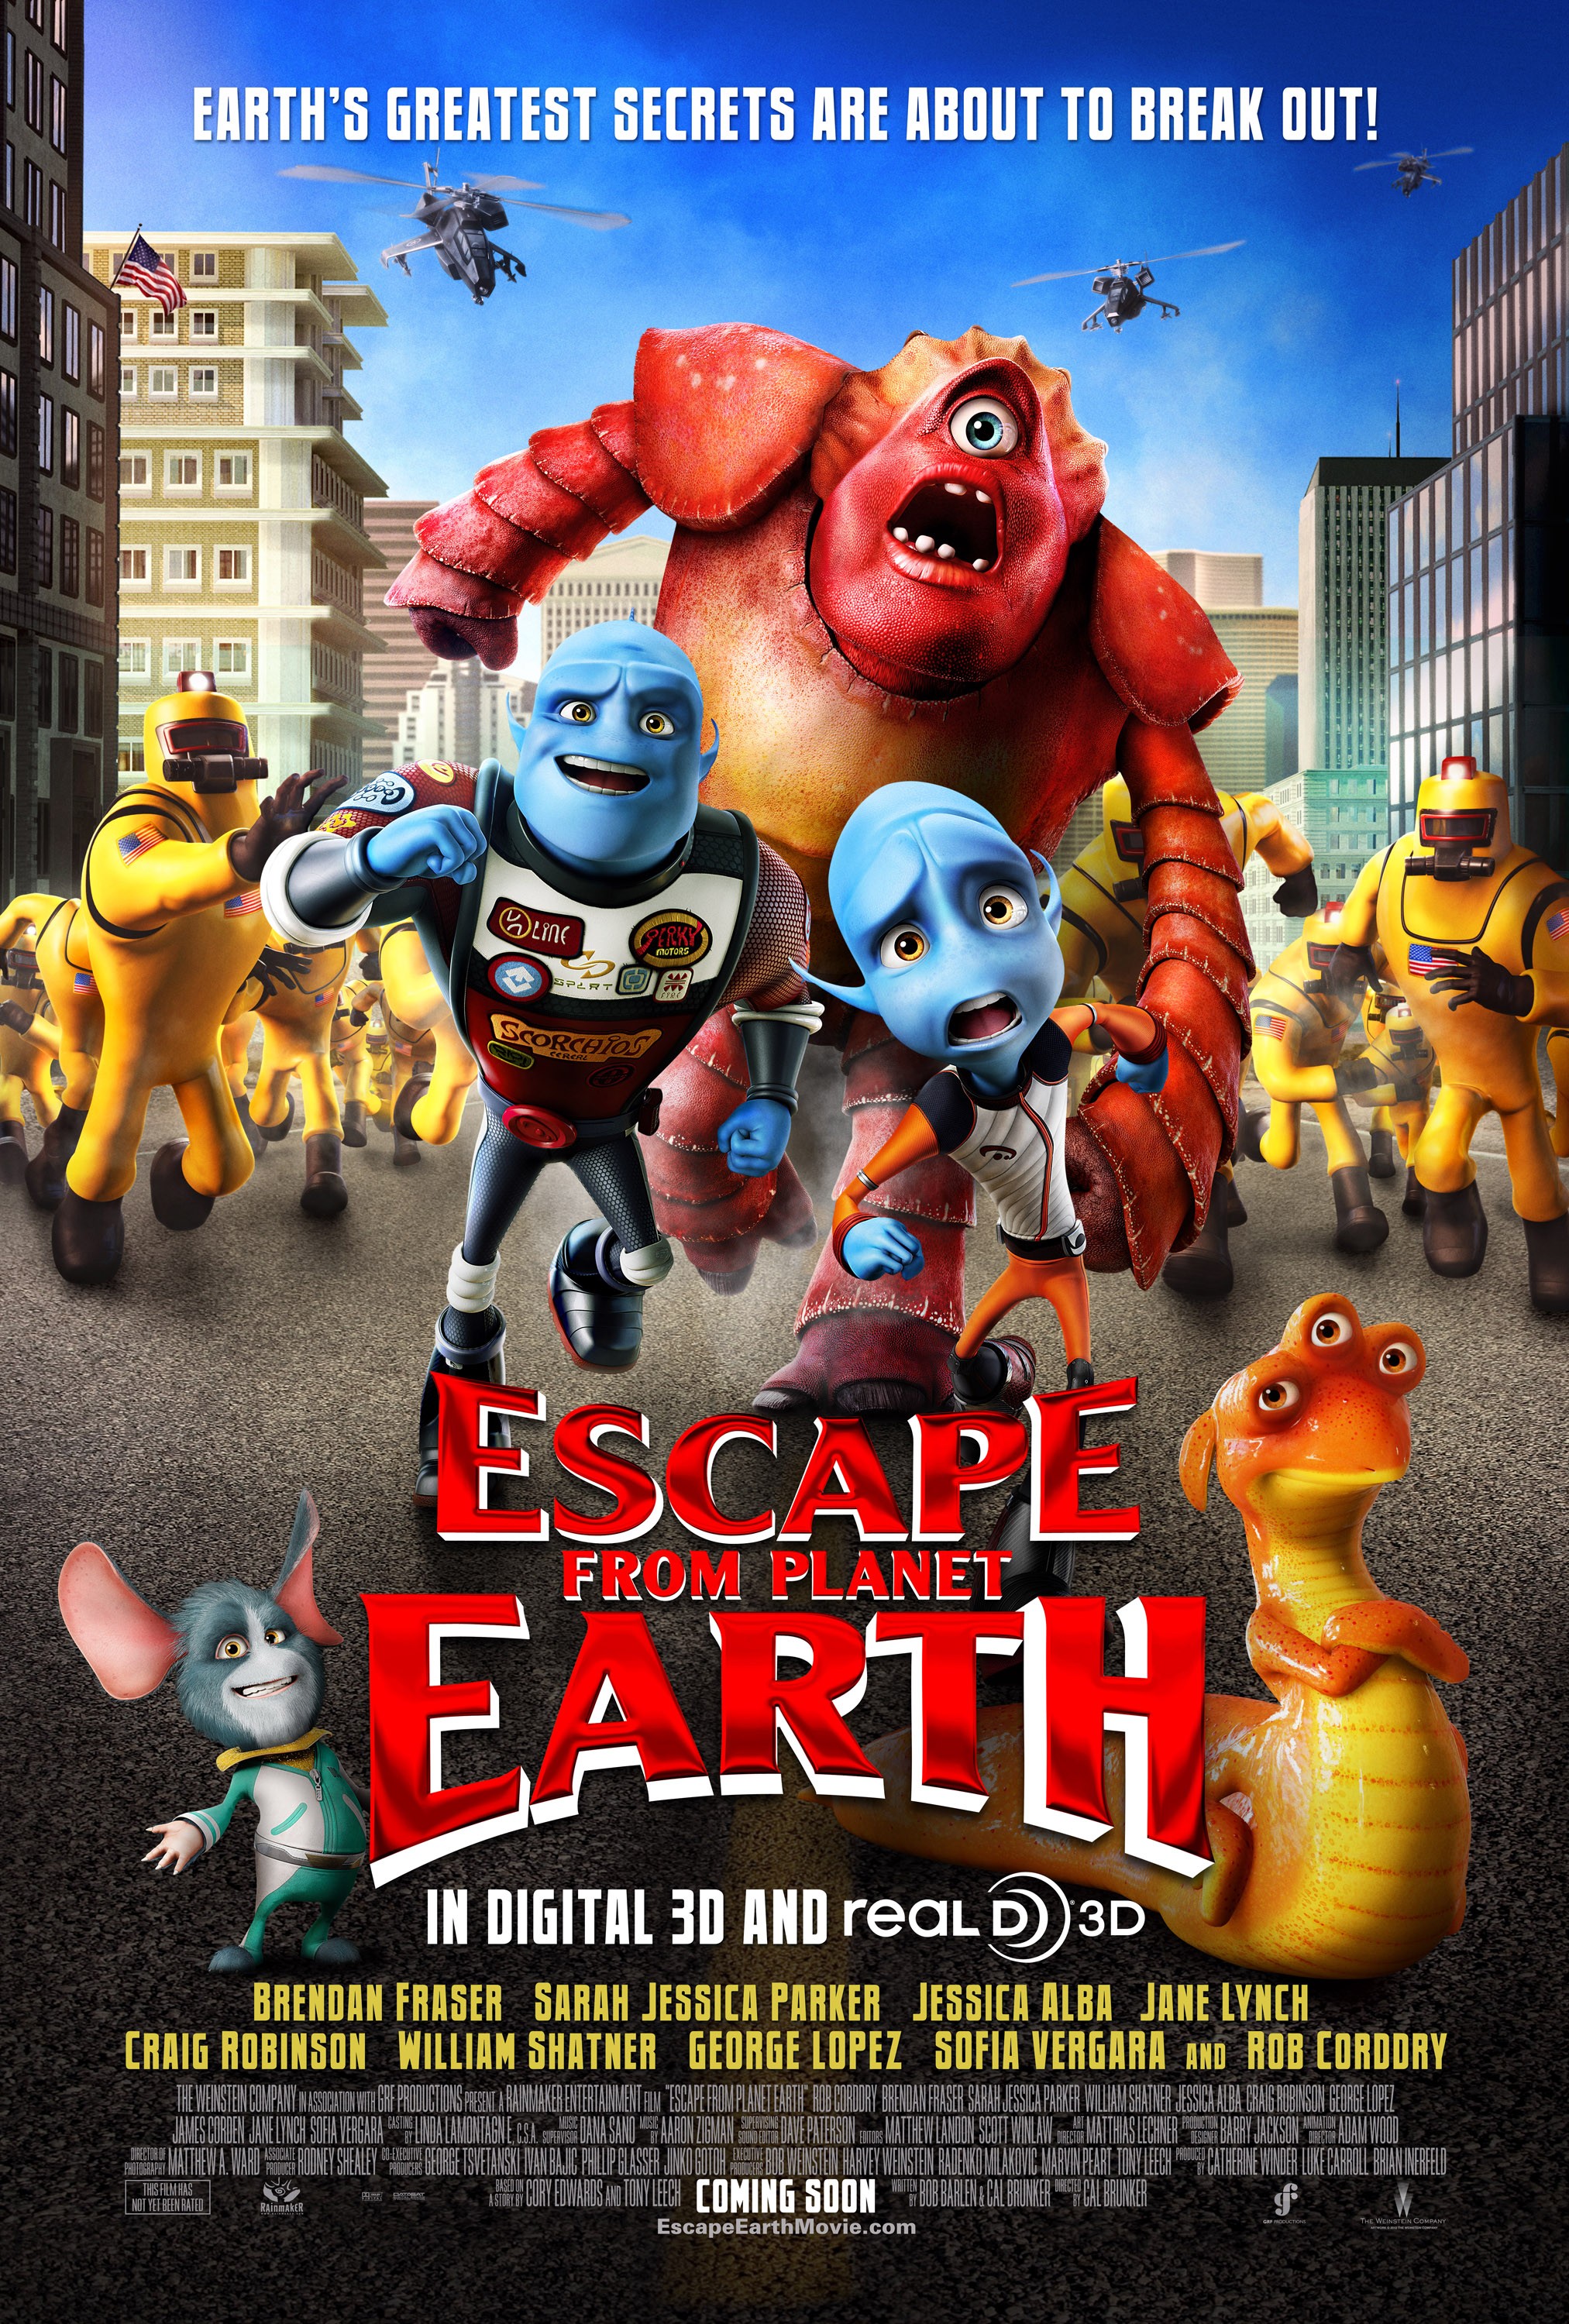 Escape From Planet Earth Theatrical Poster